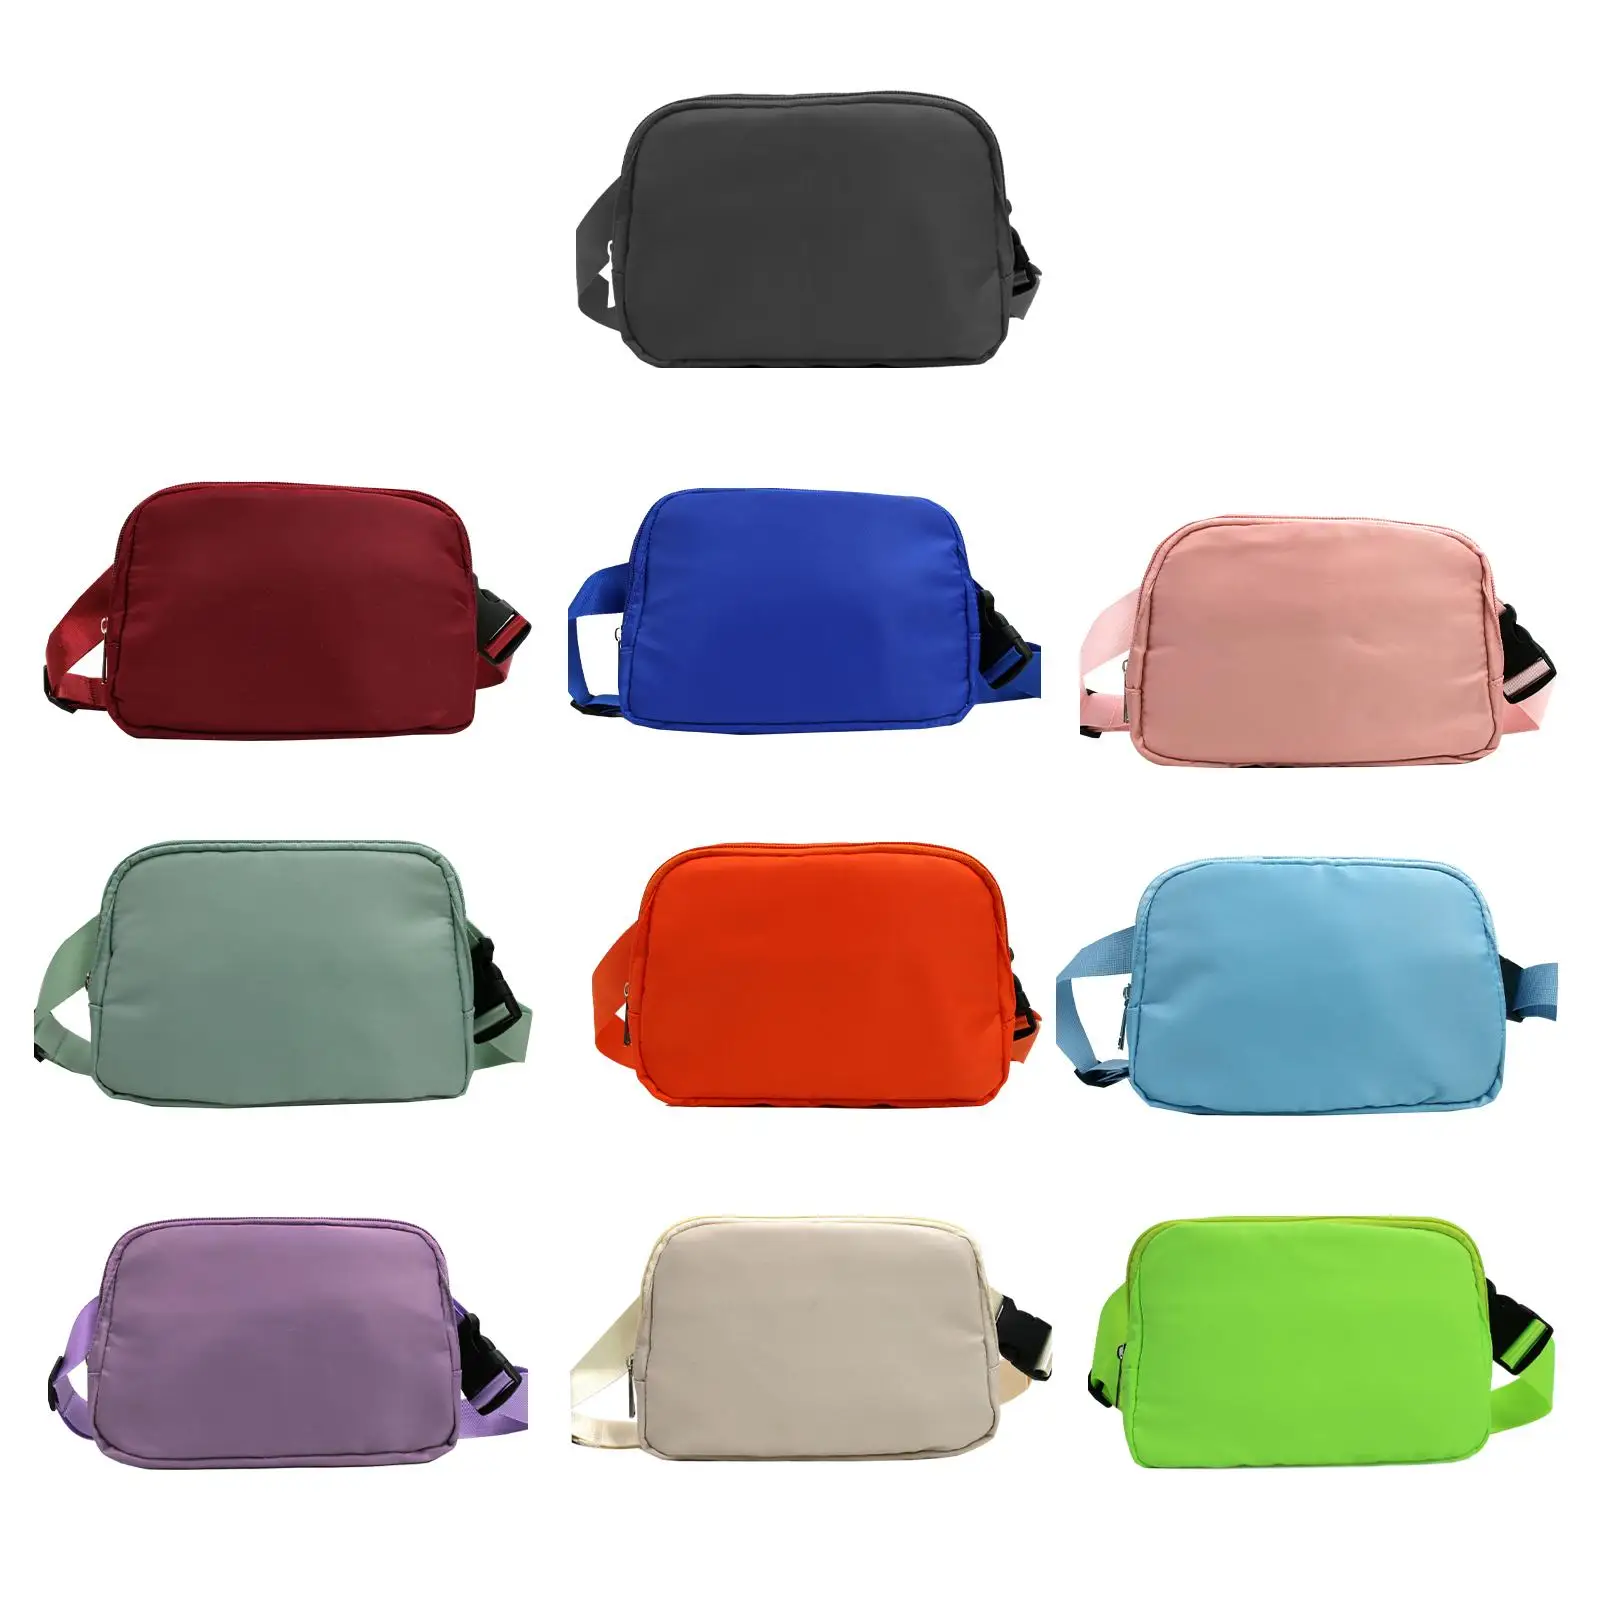 Fanny Pack Tote Waterproof Nylon Belt Bag Chest Bag Utility Belt Waist Bag Casual for Running Walking Leisure Outdoor Riding